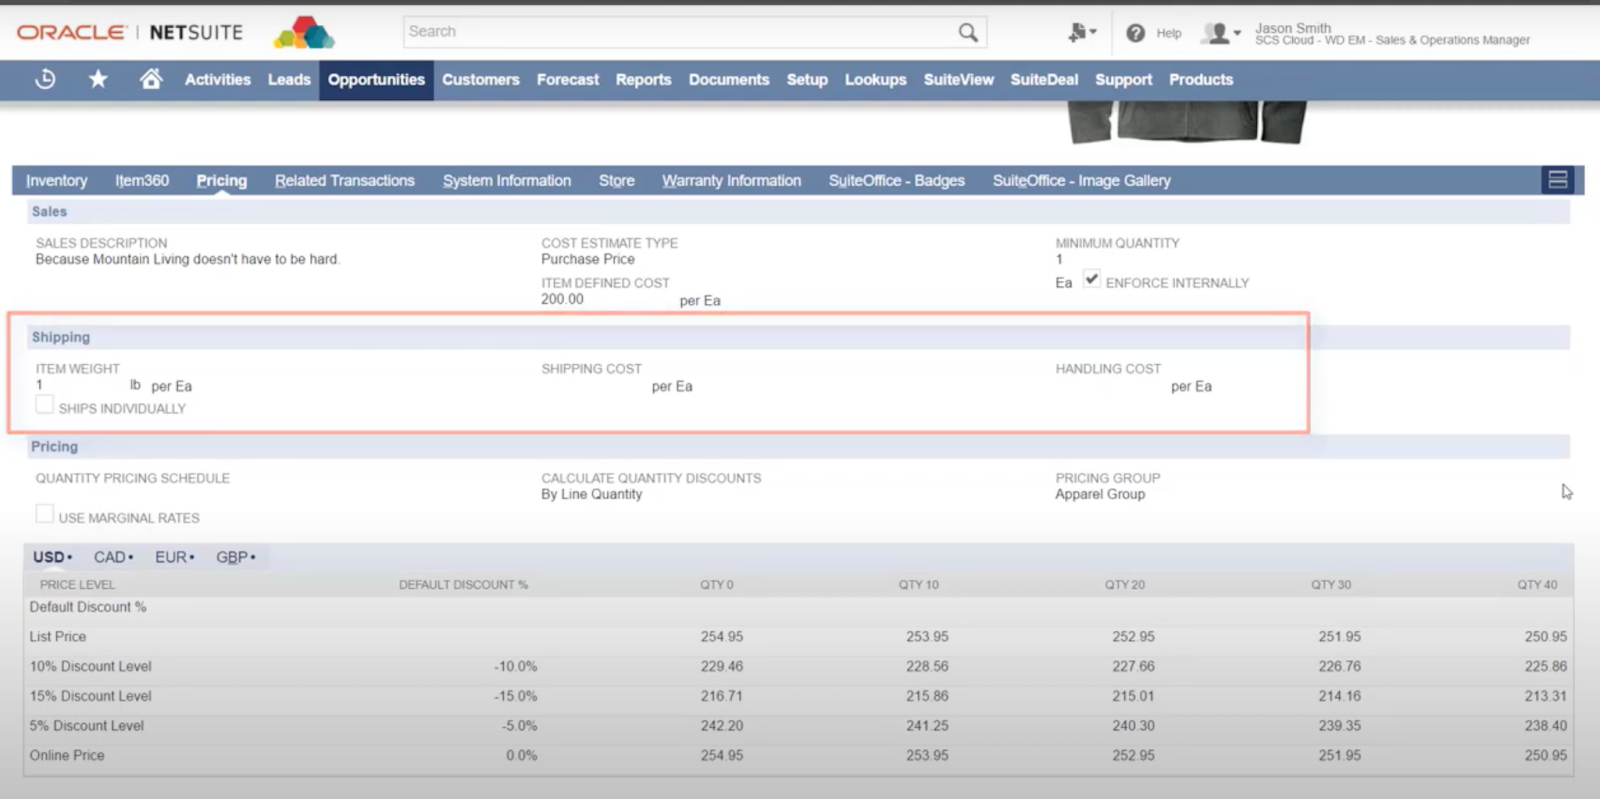 The shipping section in Netsuite's pricing subtab, showing item weight, shipping cost, and handling cost. 